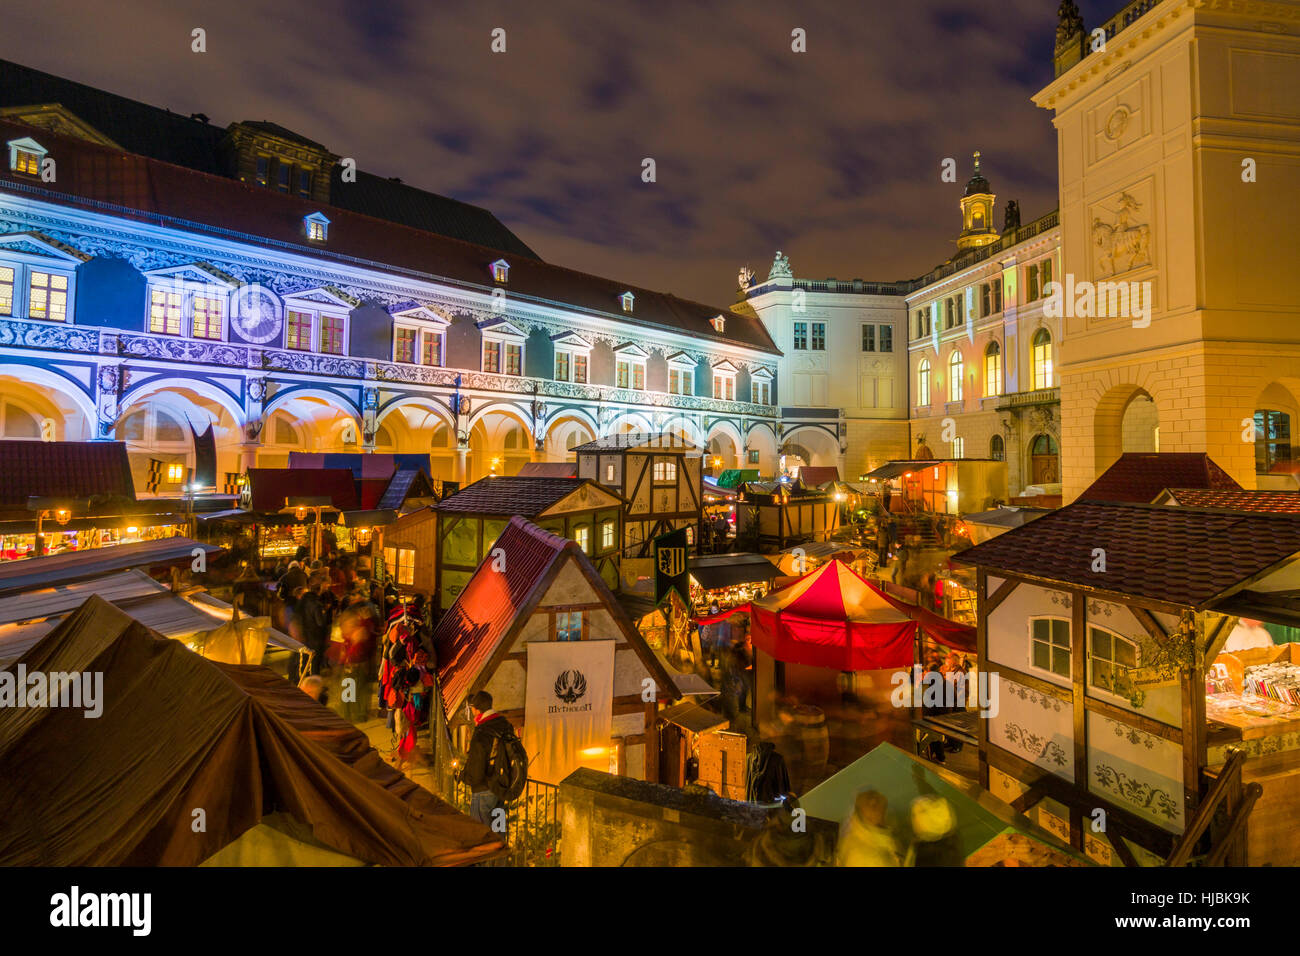 The historical, Renaissance-style Christmas market in the former horse stable Stallhof Stock Photo